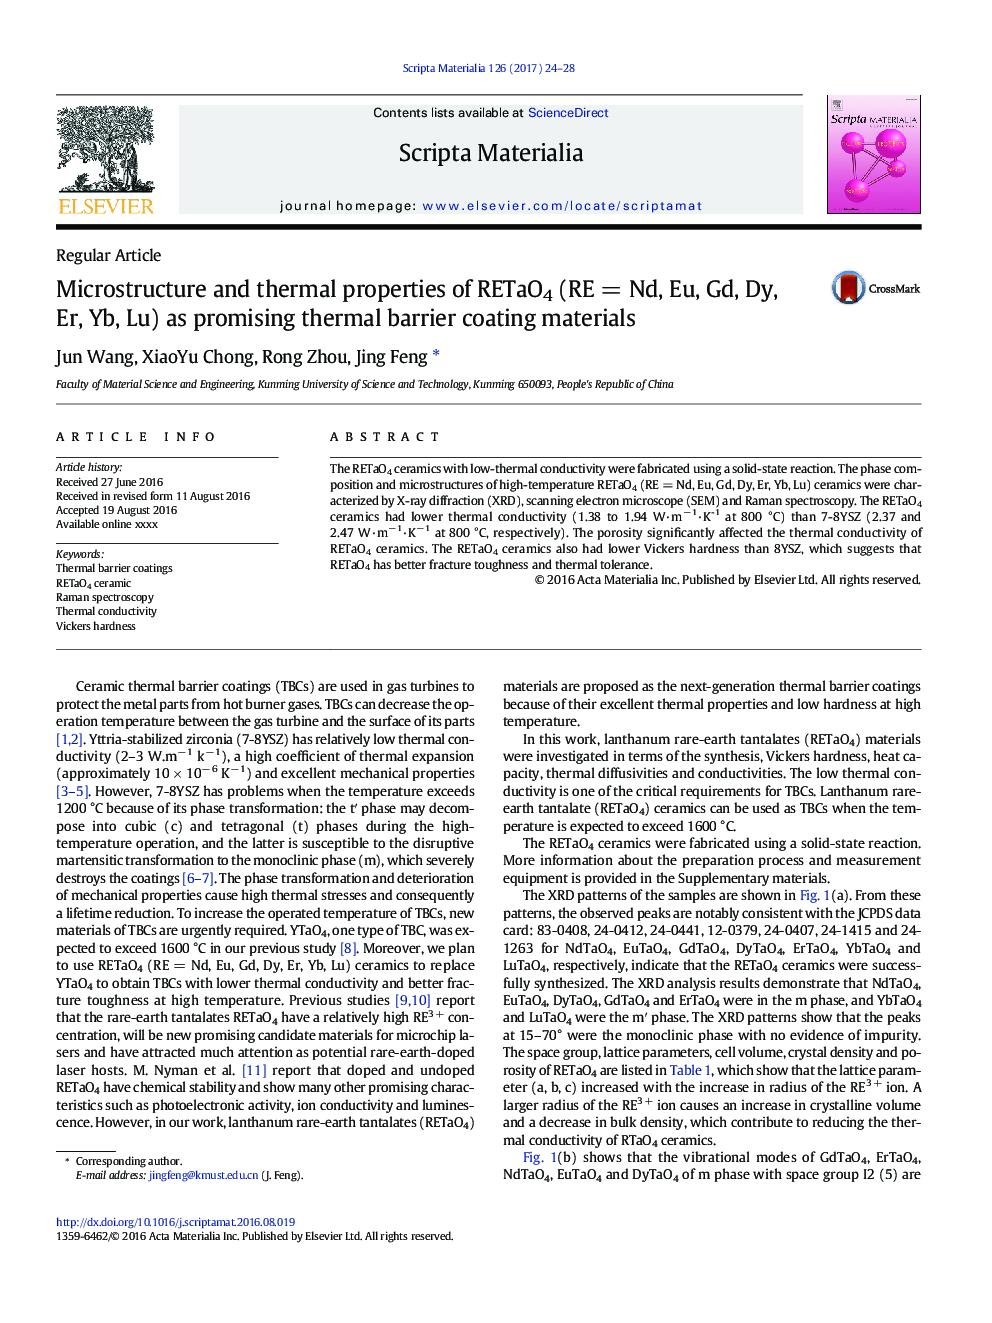 Microstructure and thermal properties of RETaO4 (RE = Nd, Eu, Gd, Dy, Er, Yb, Lu) as promising thermal barrier coating materials